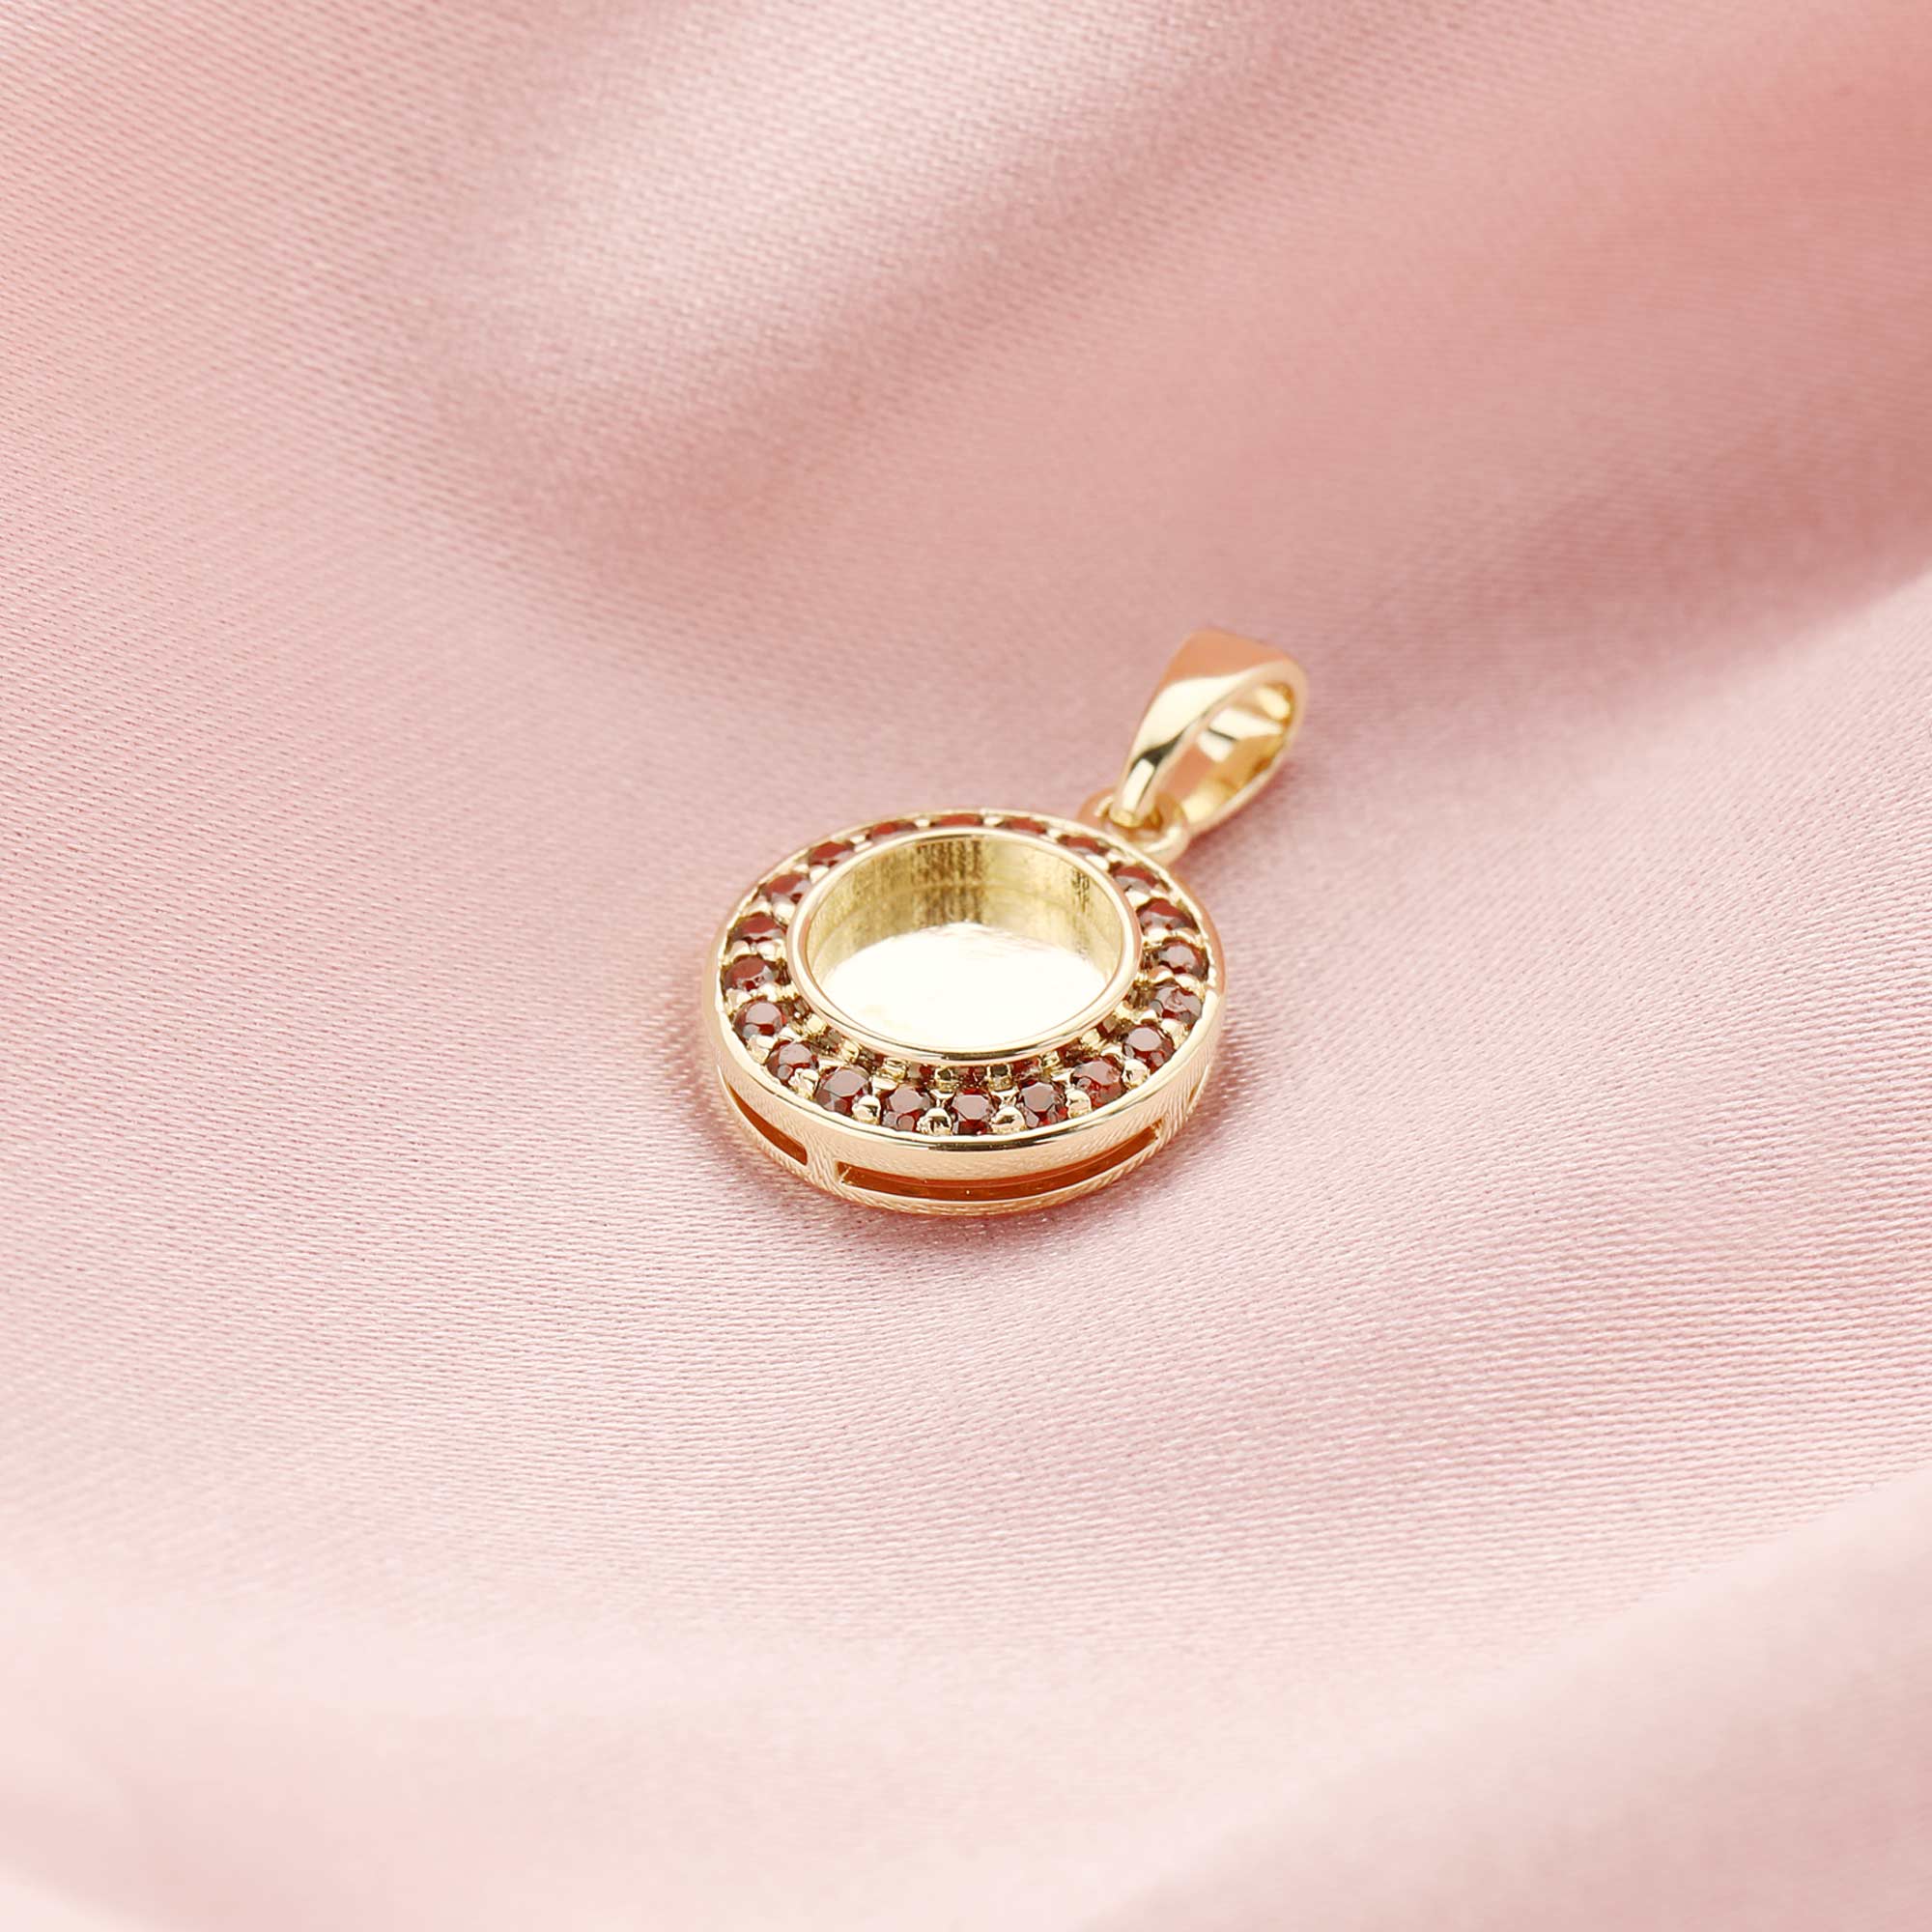 8MM Keepsake Breast Milk Round Pendant Bezel with Birthstone,Solid 14K 18K Gold Charm,Halo Birthstone Deco Charm,DIY Solid Back Charm Bezel For Resin 1411326 - Click Image to Close